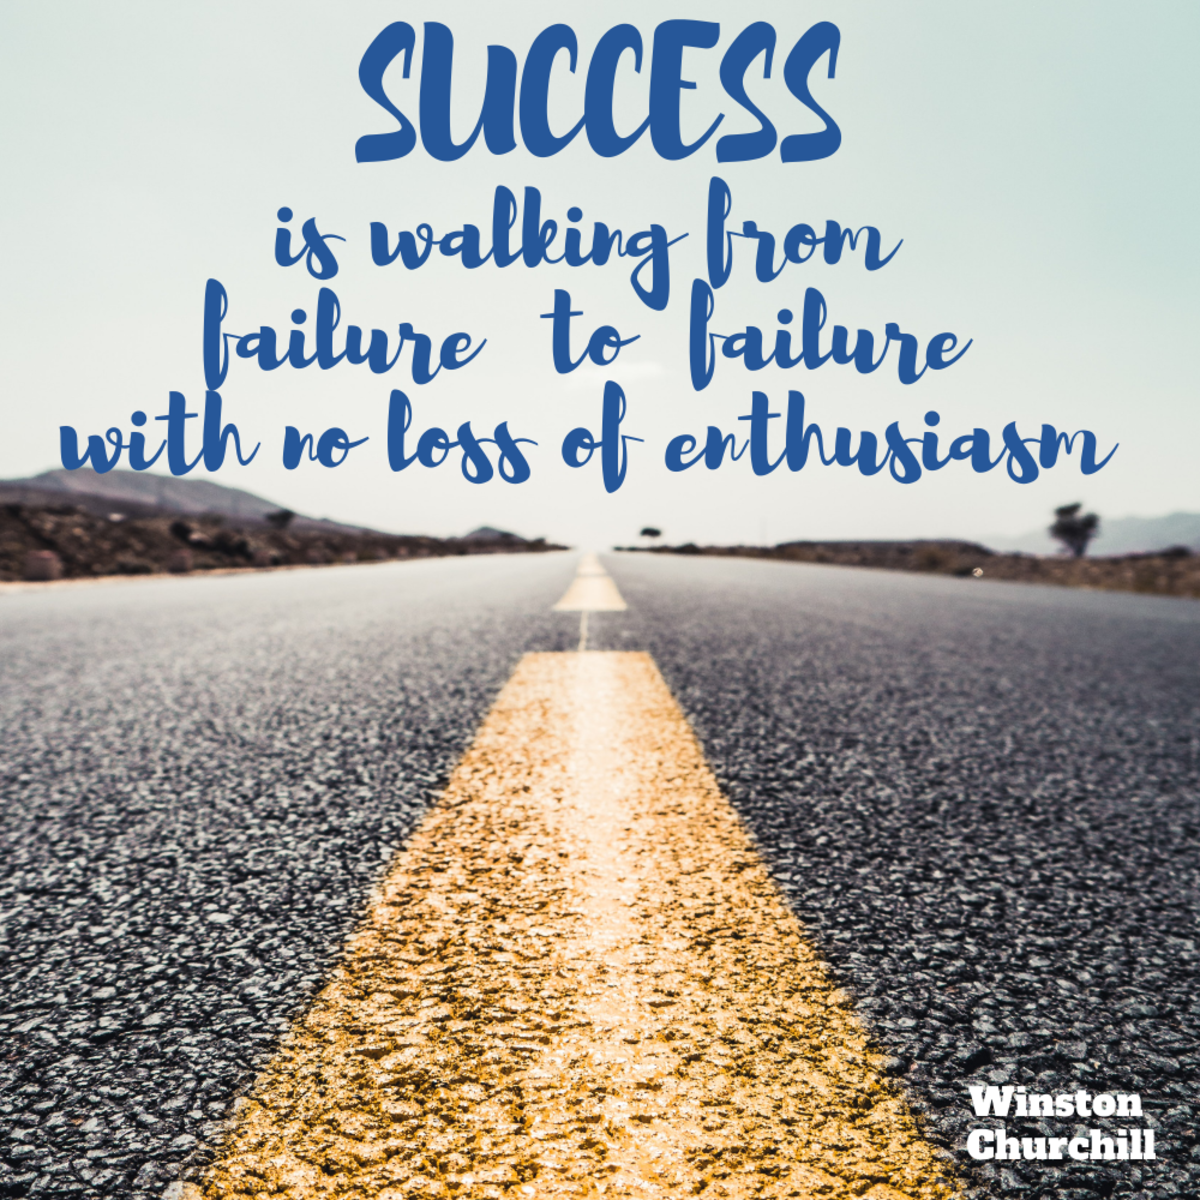 "Success is walking from failure to failure with no loss of enthusiasm.” Winston Churchill